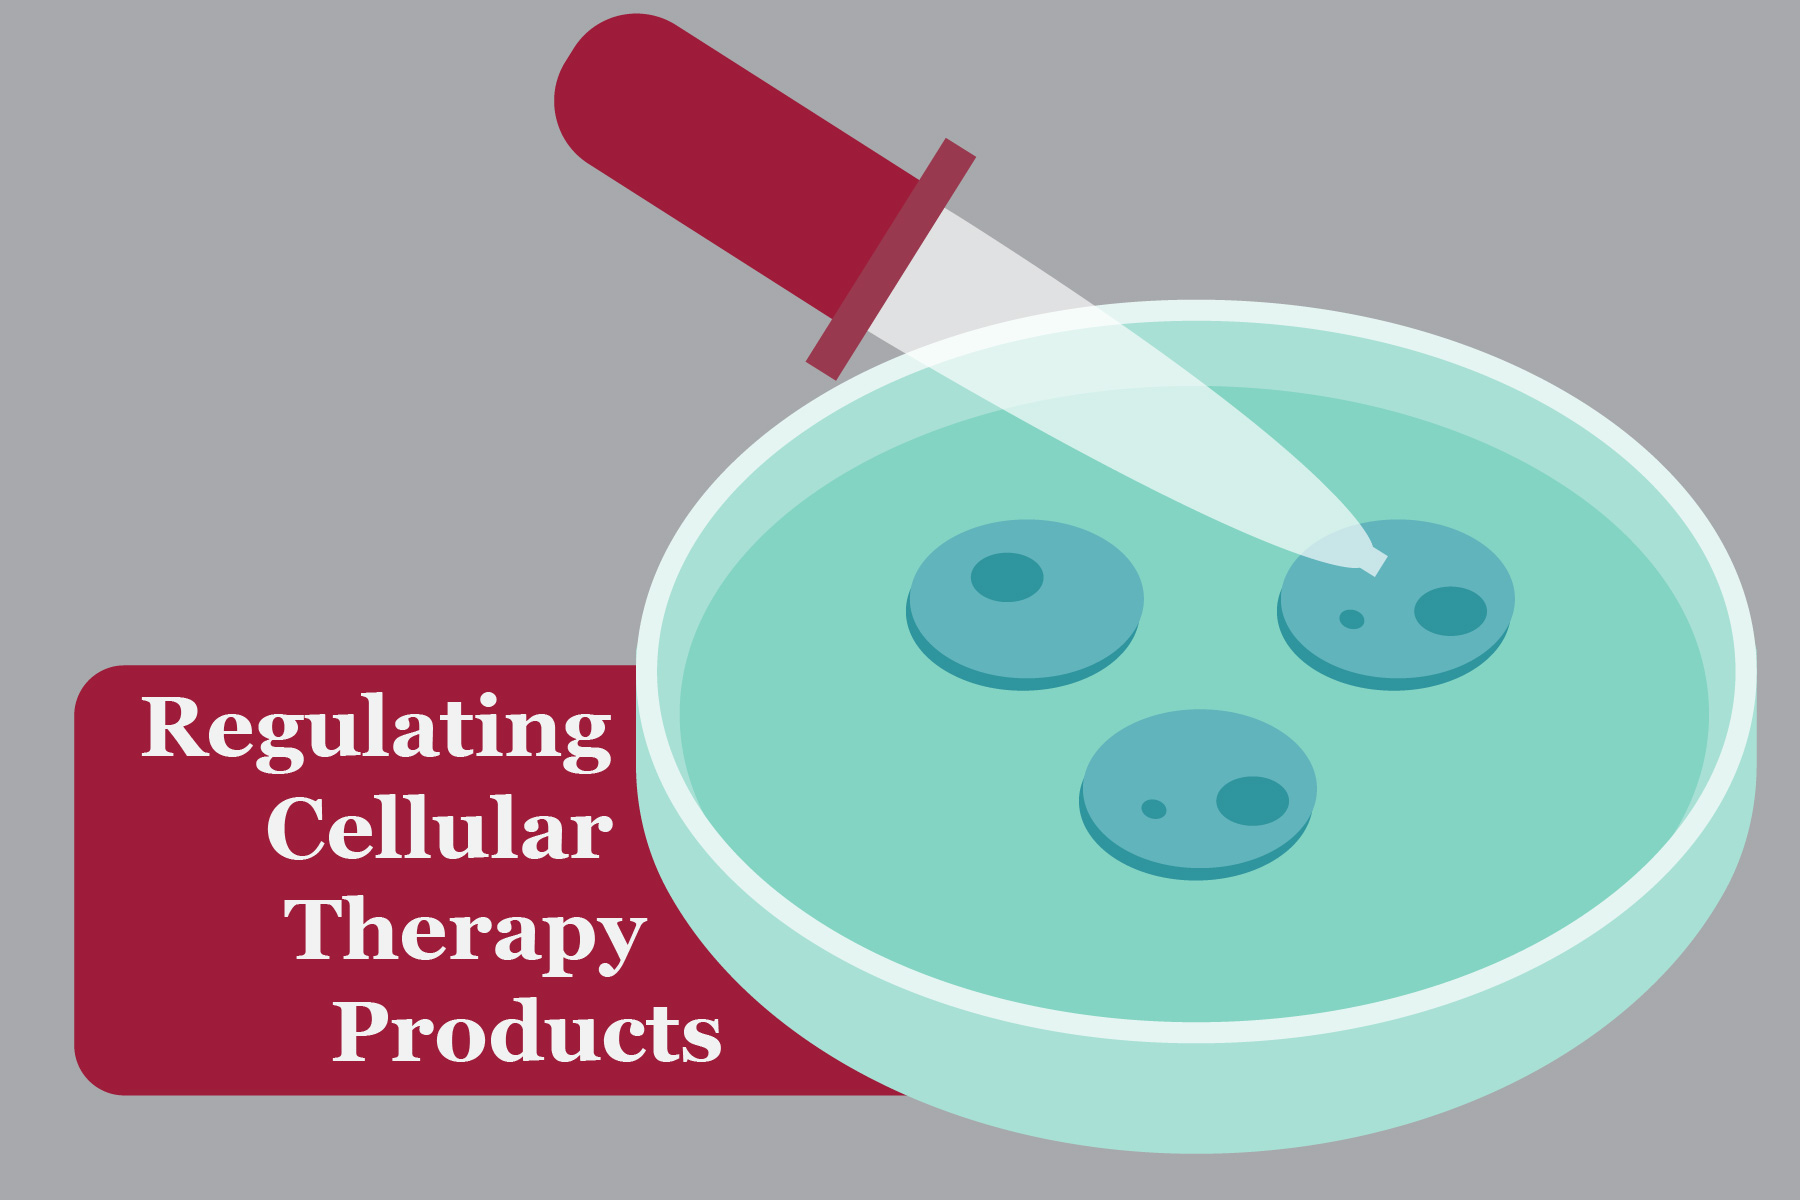 Regulating Cellular Therapy Products